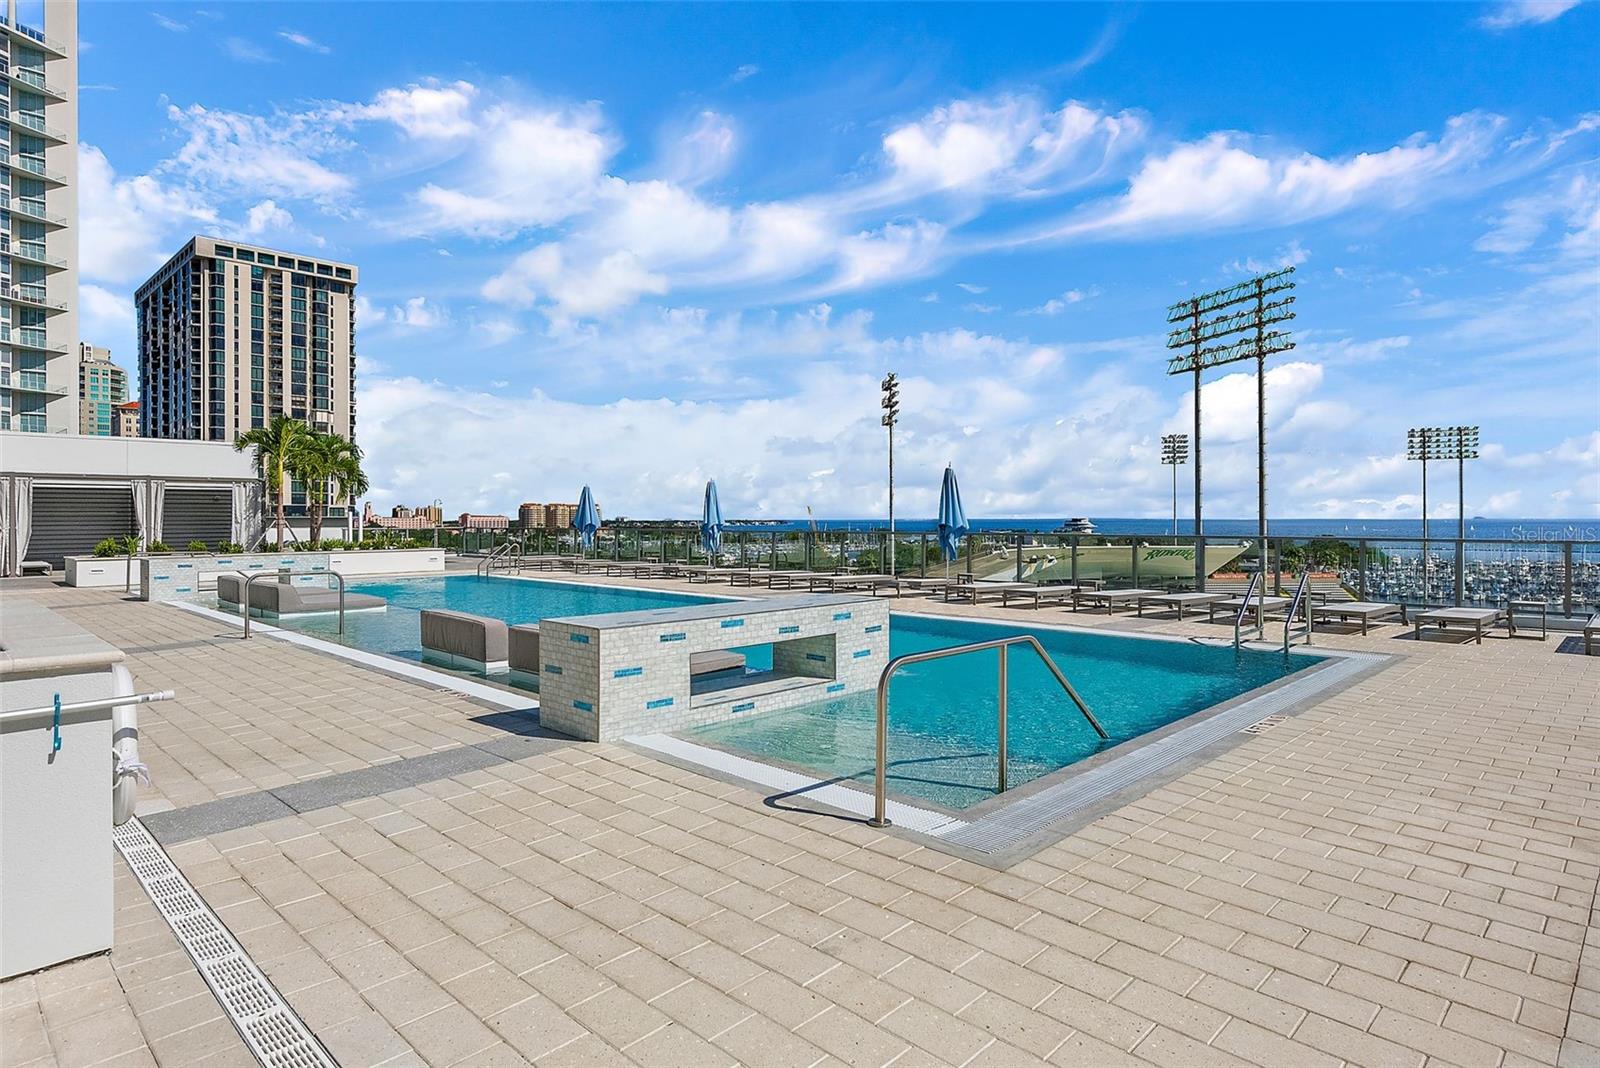 Saltaire's pool deck - outrageous views of the Rowdies Soccer Stadium and Tampa Bay